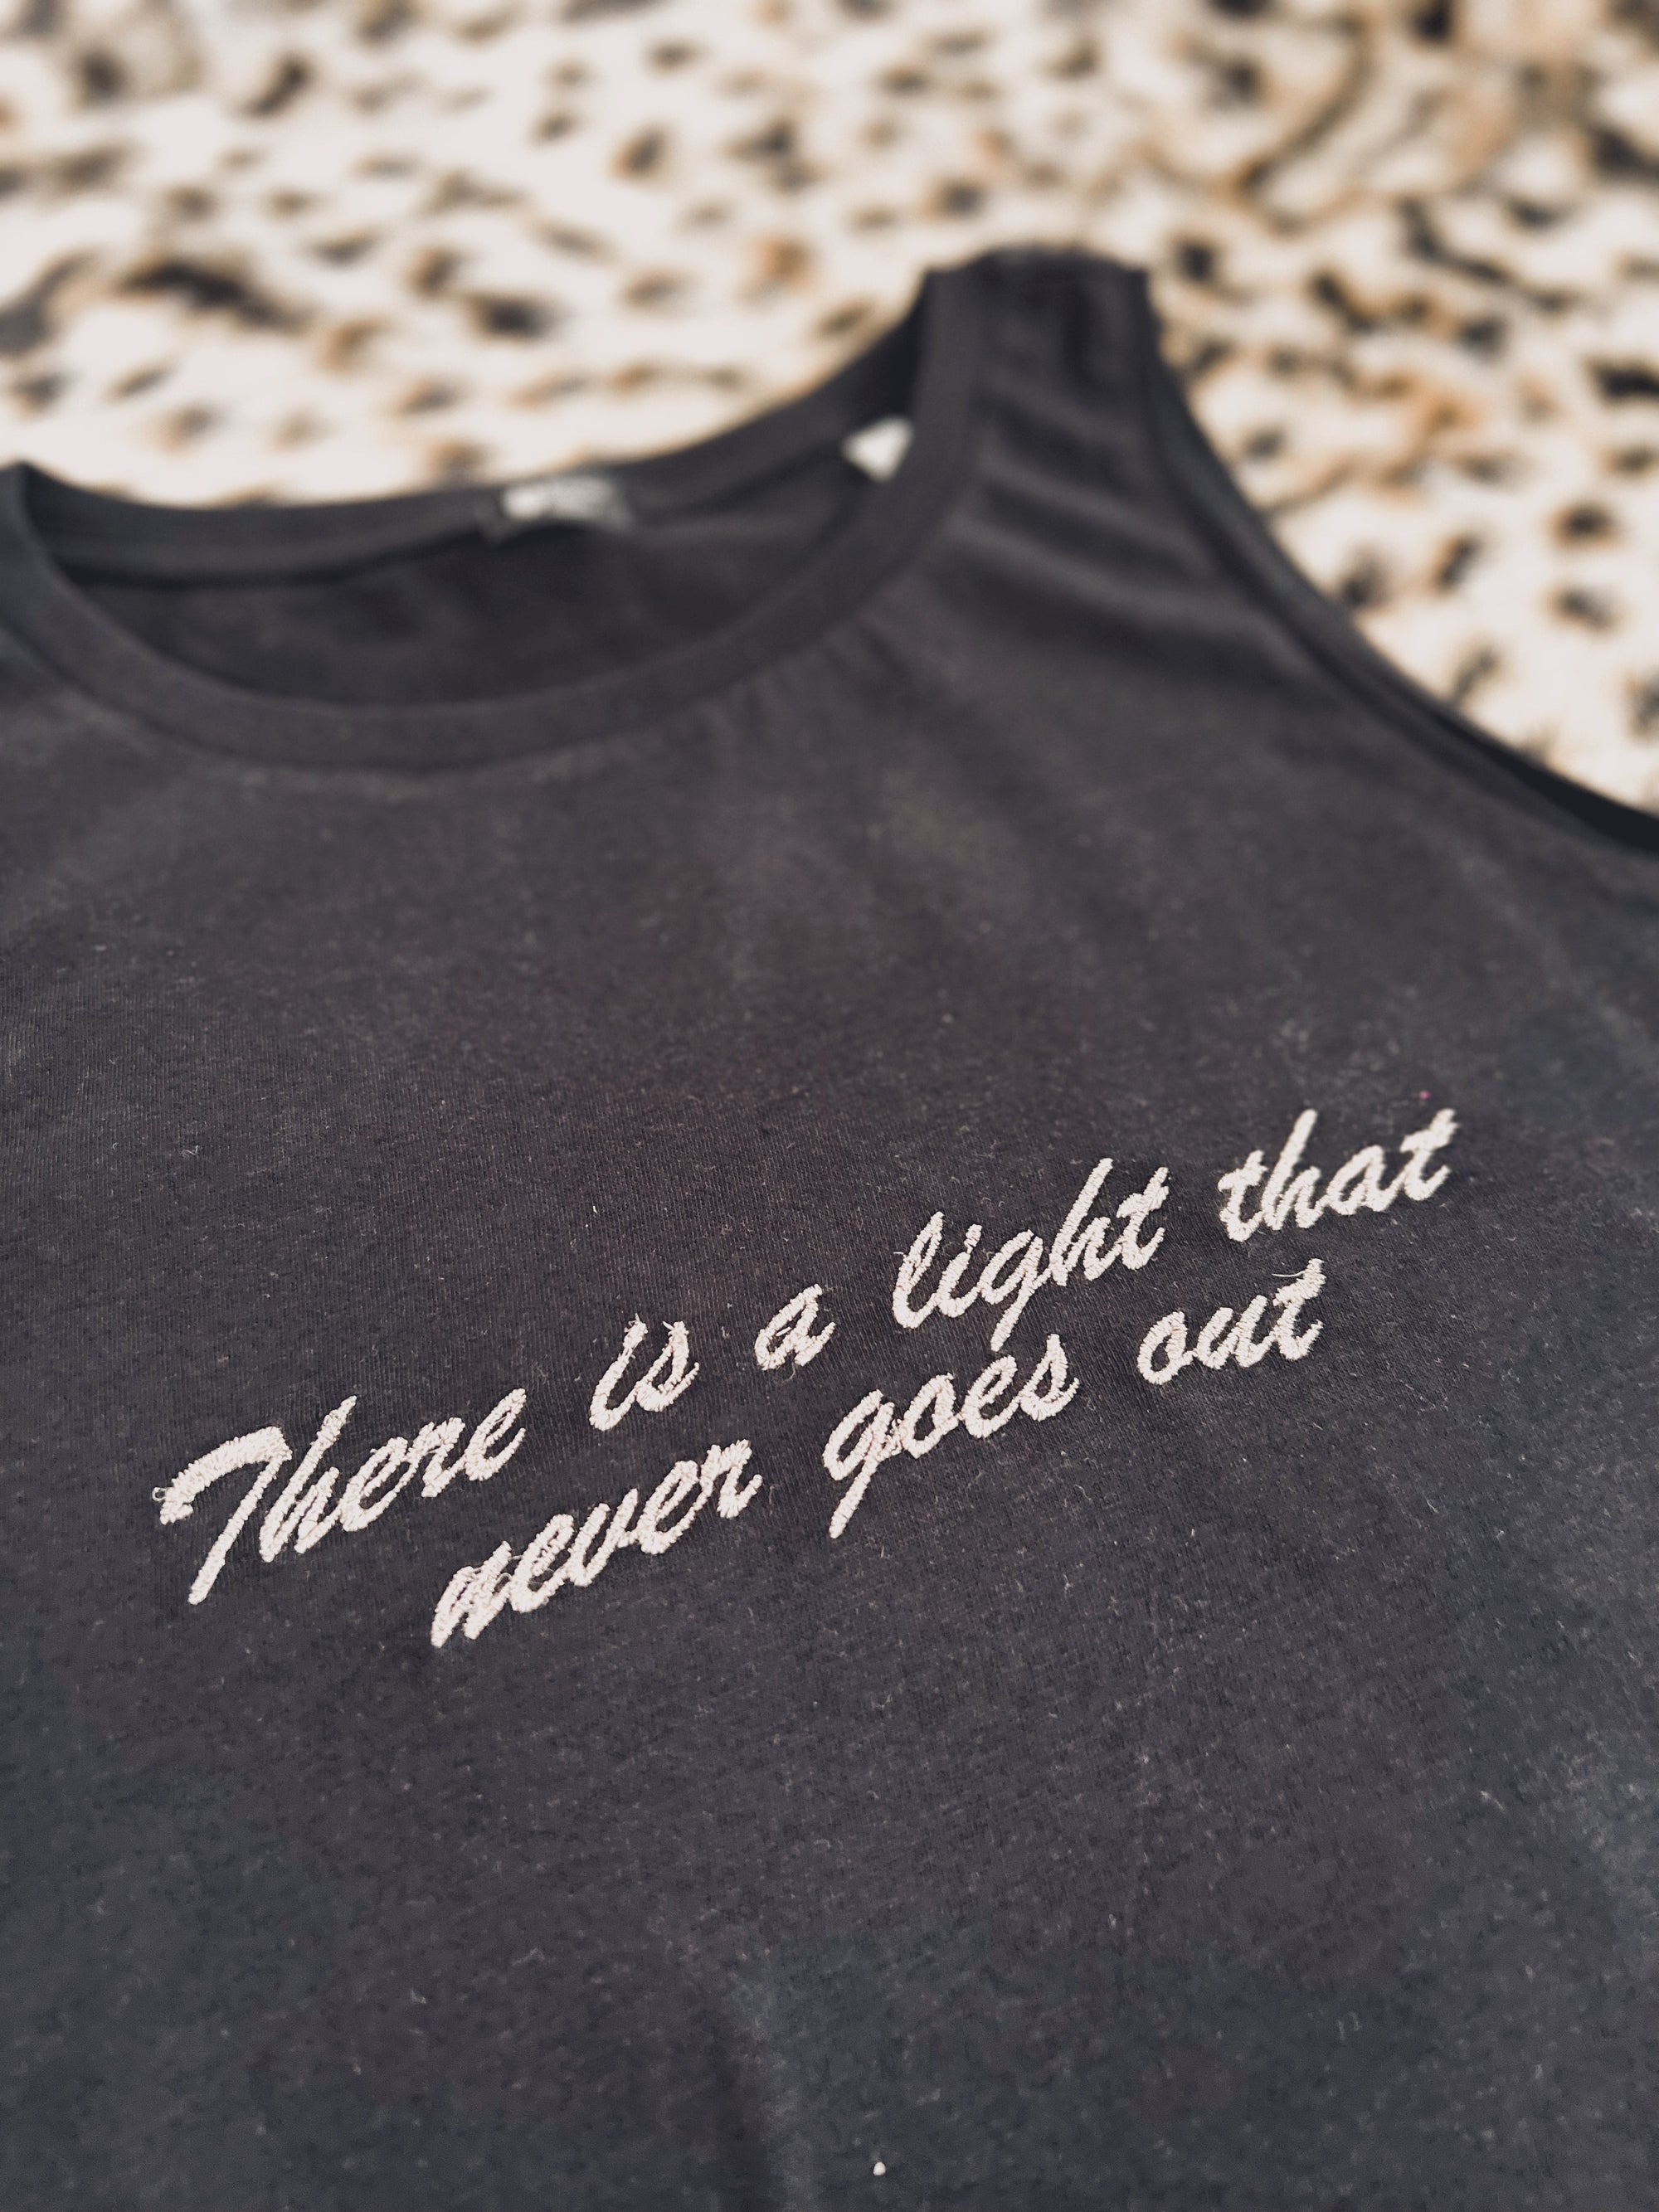 SAMPLE SALE ‘THERE IS A LIGHT THAT NEVER GOES OUT’ EMBROIDERED WOMEN'S CROPPED ORGANIC COTTON 'DANCER' TANK TOP (SIZE XS)